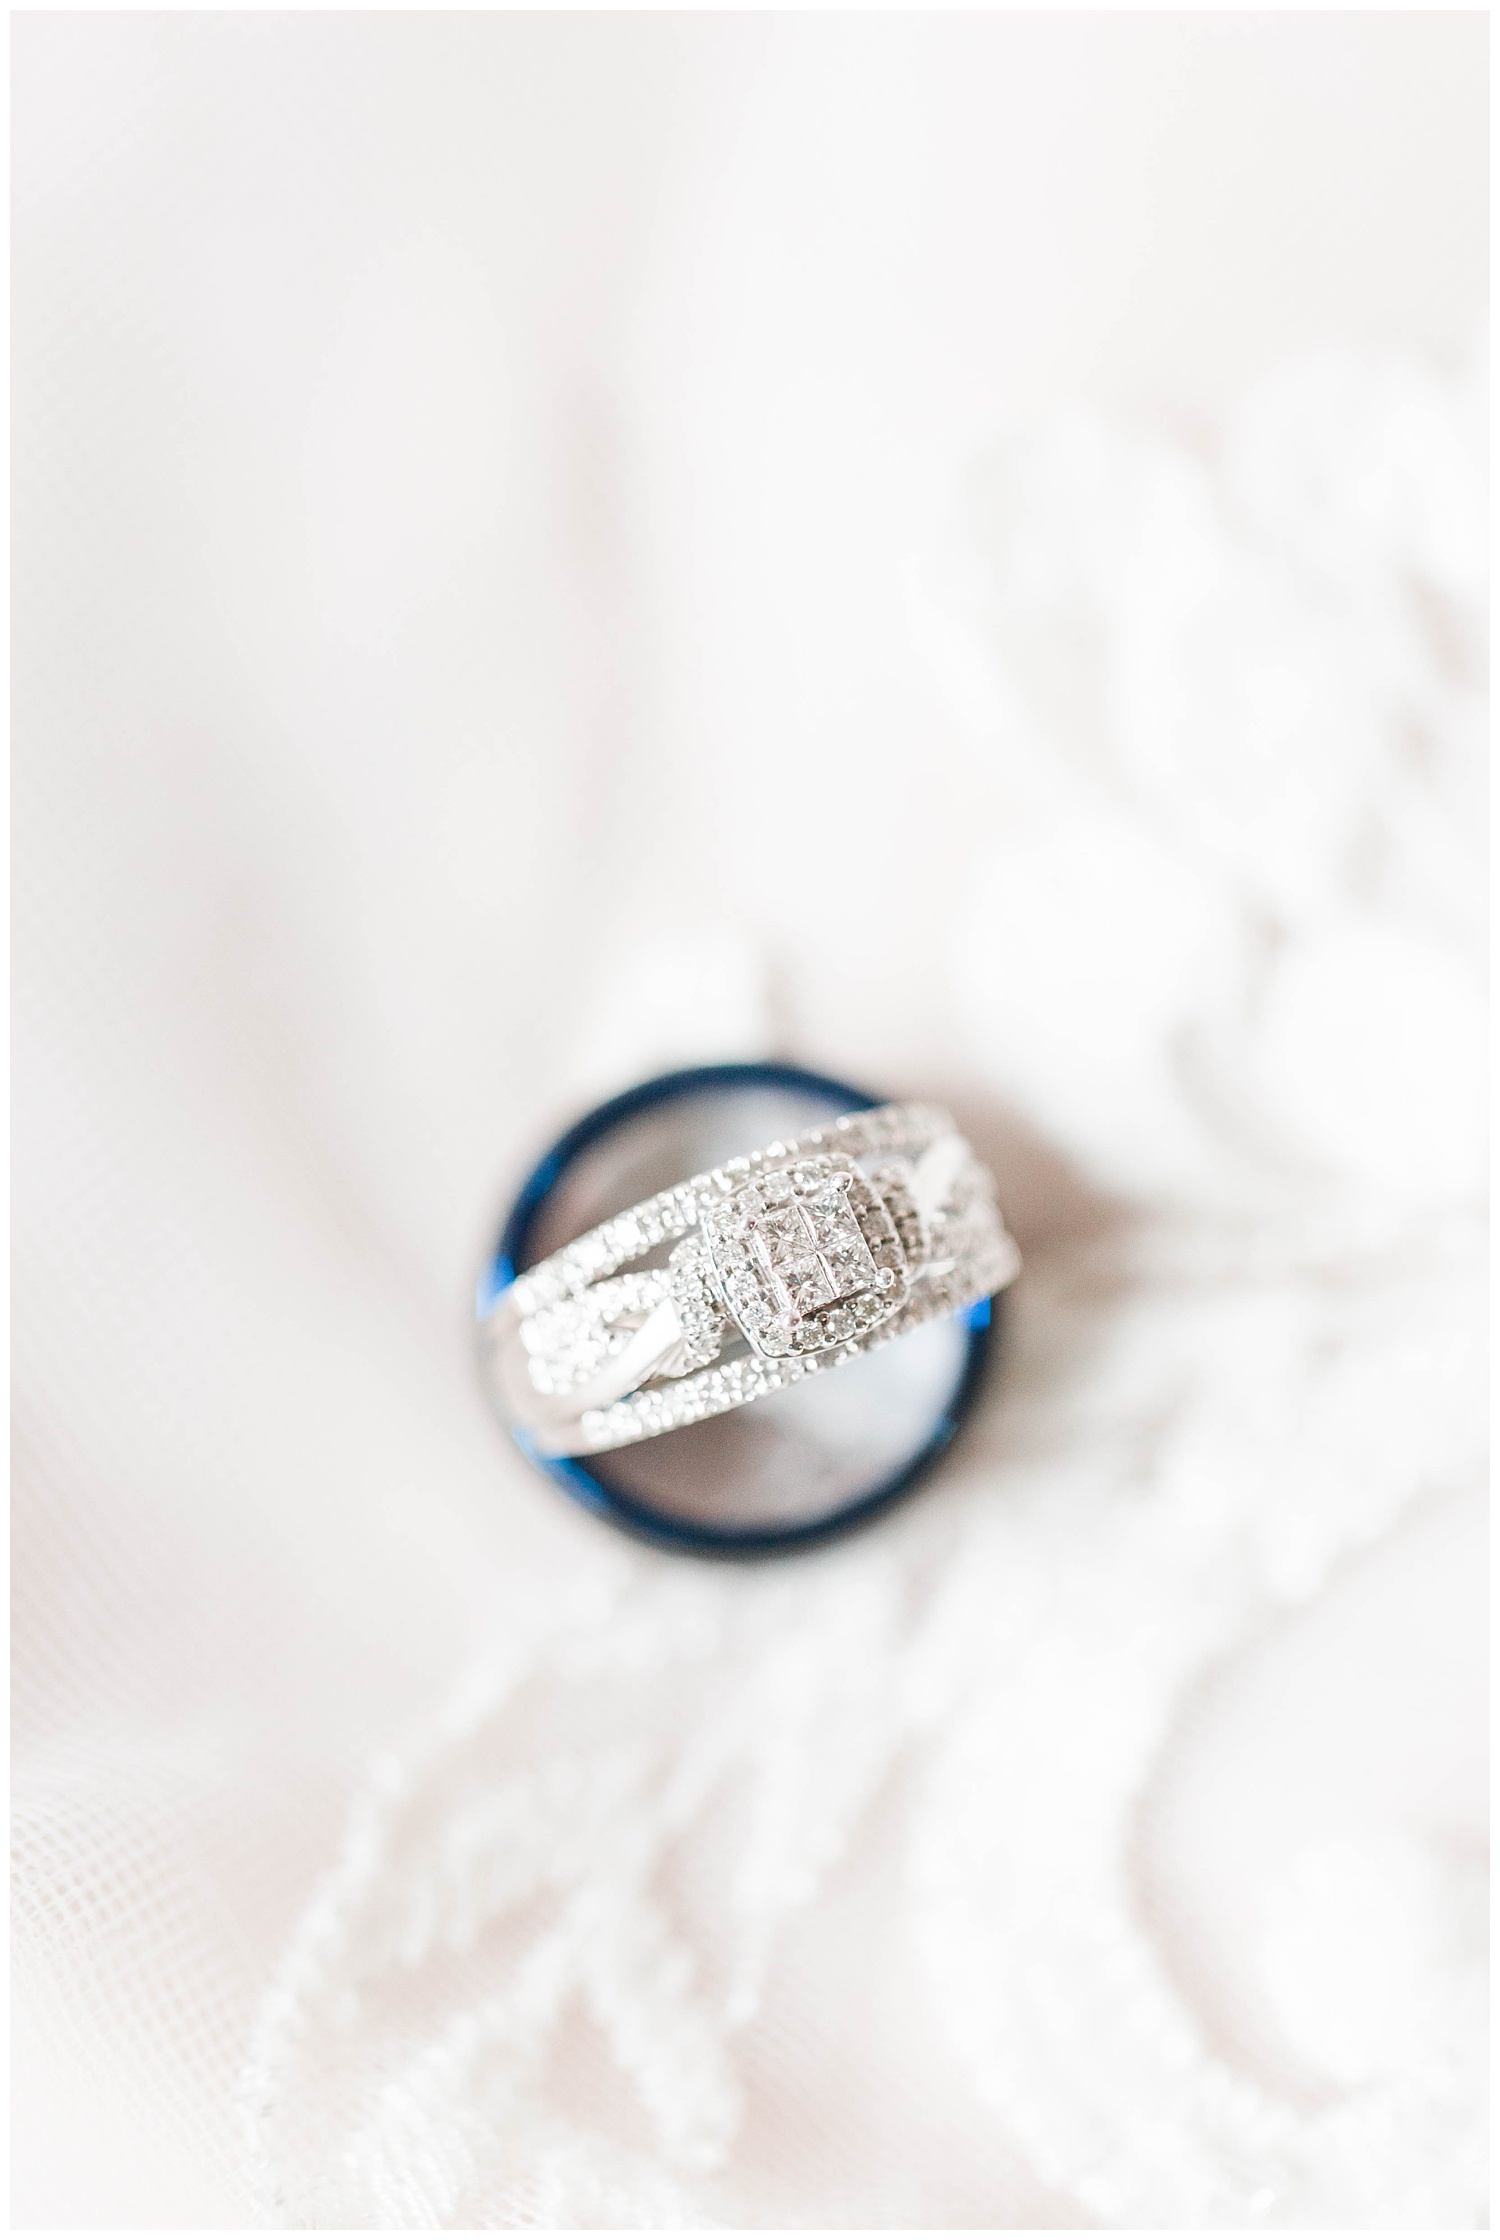 Bridal wedding band and groom's ring delicately placed on the lace of a wedding dress. | CB Studio